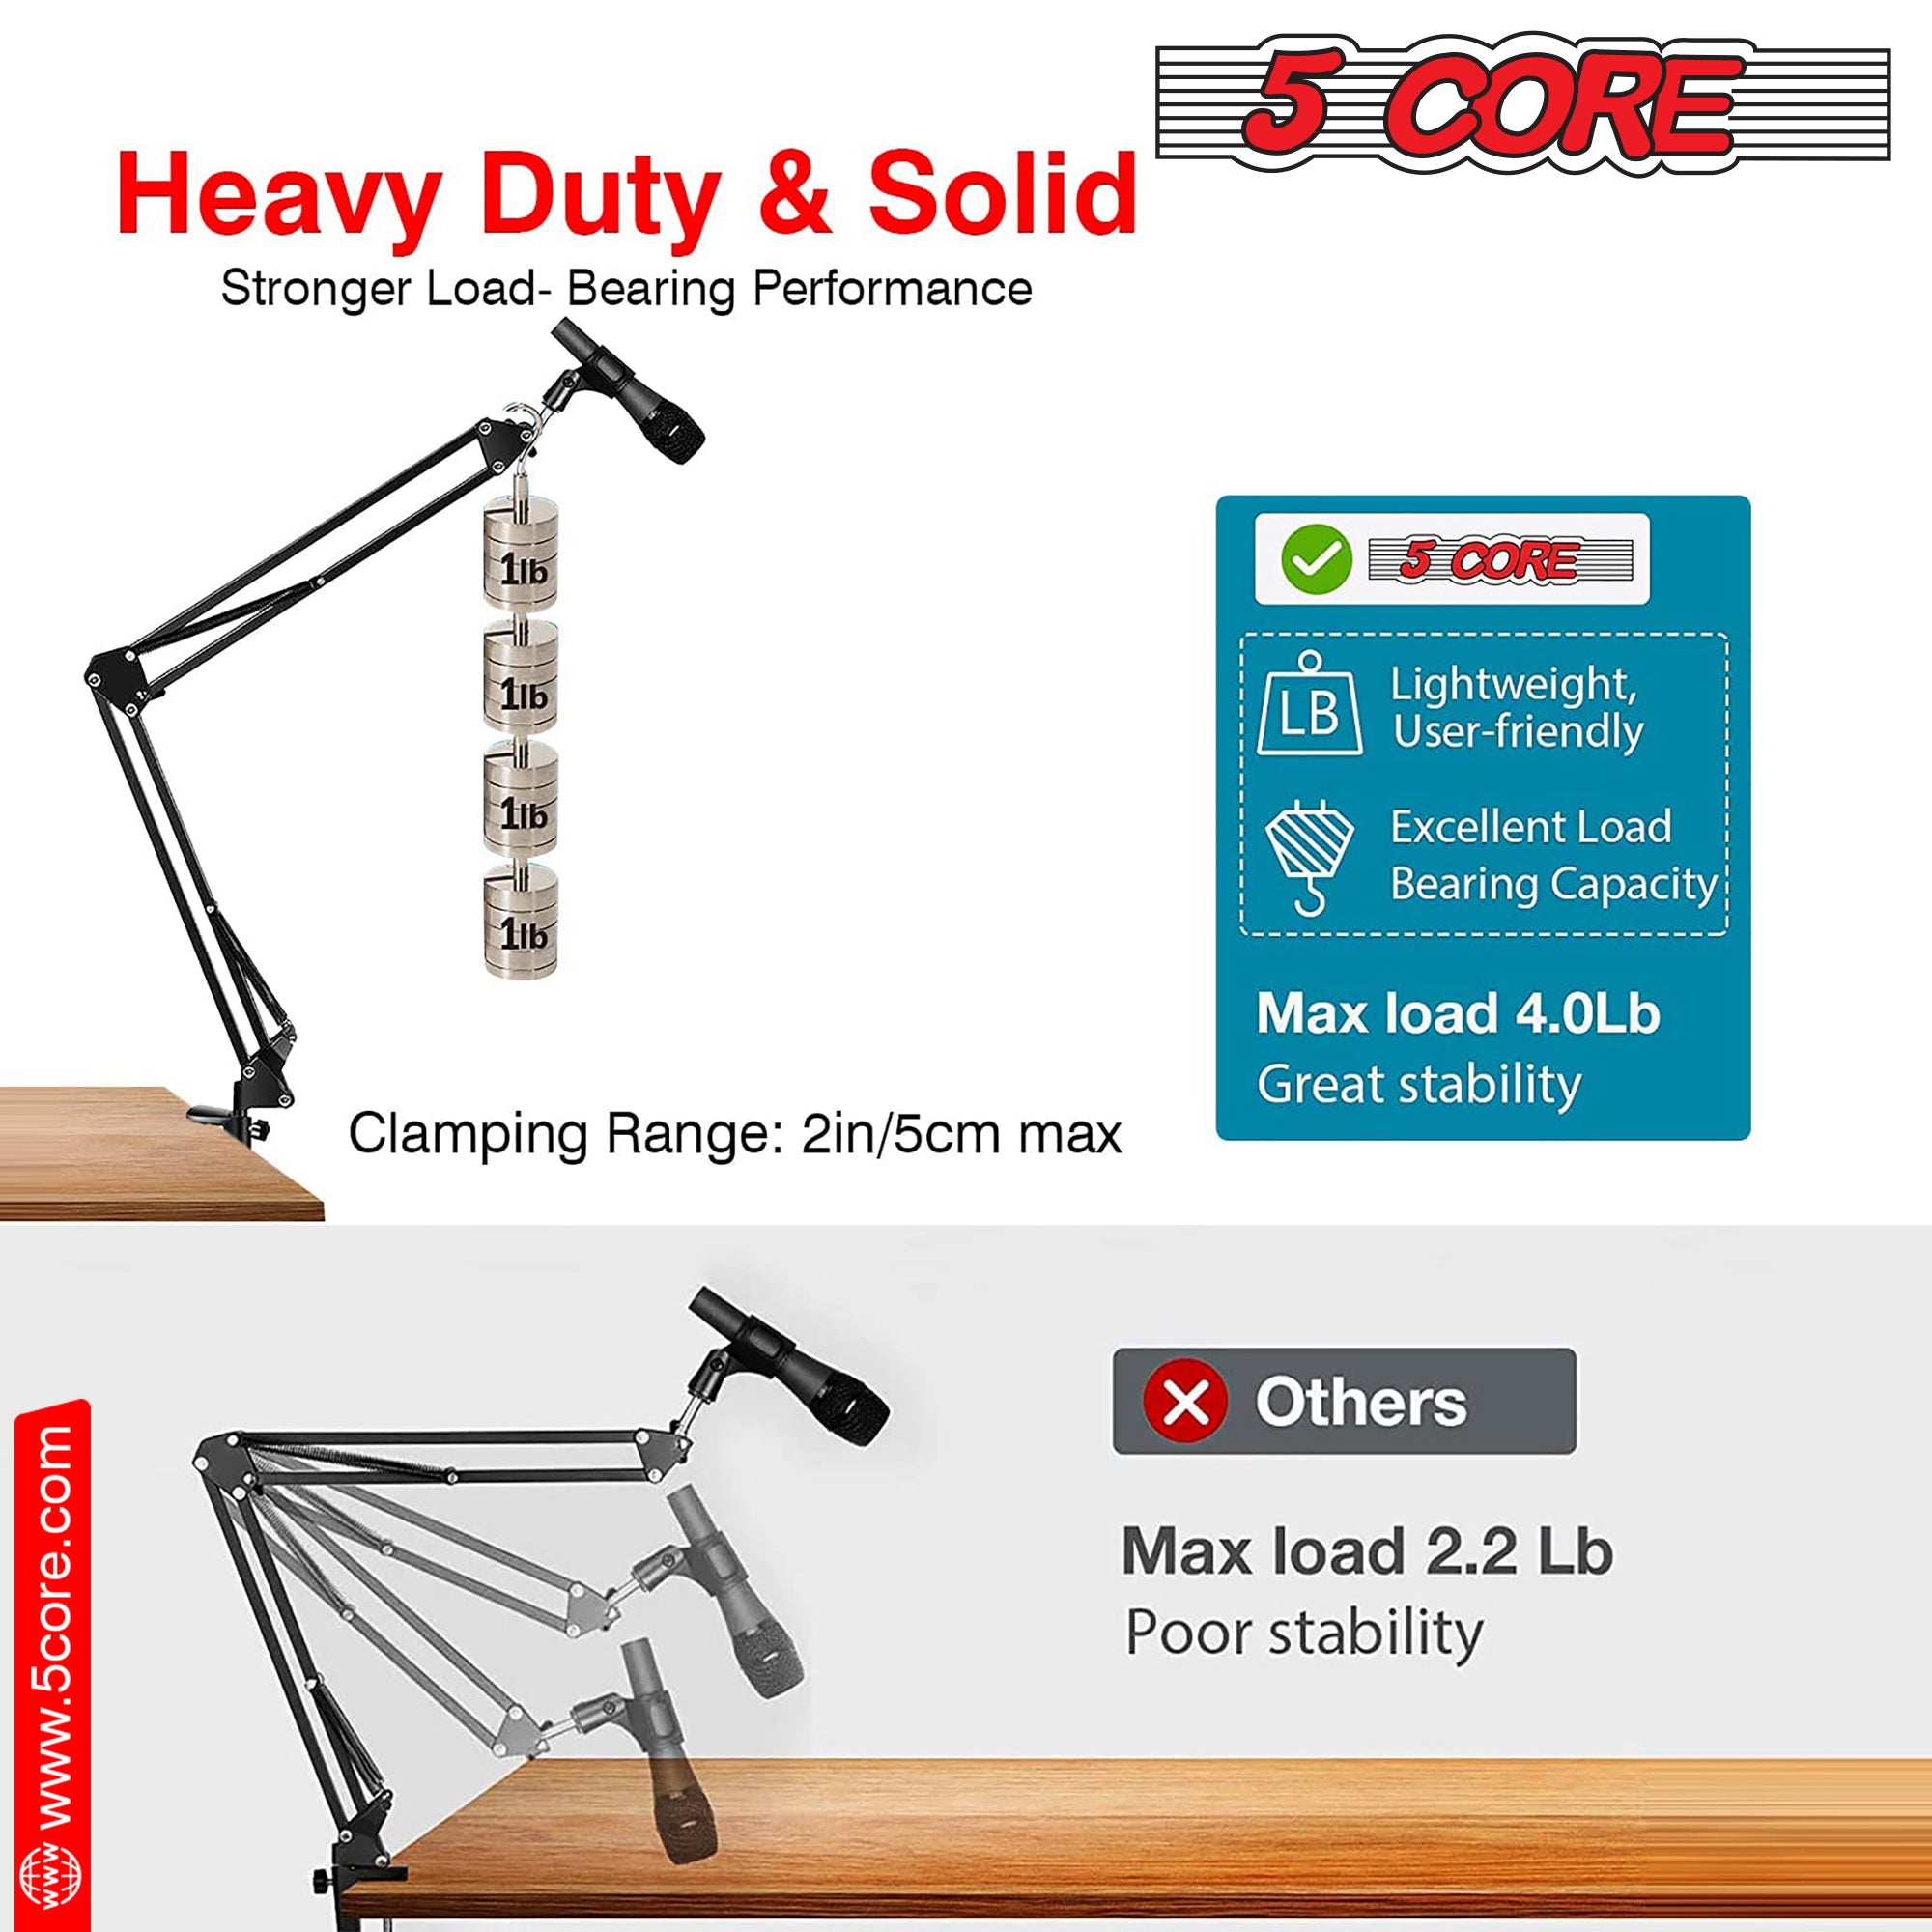 Heavy duty & solid mic stand